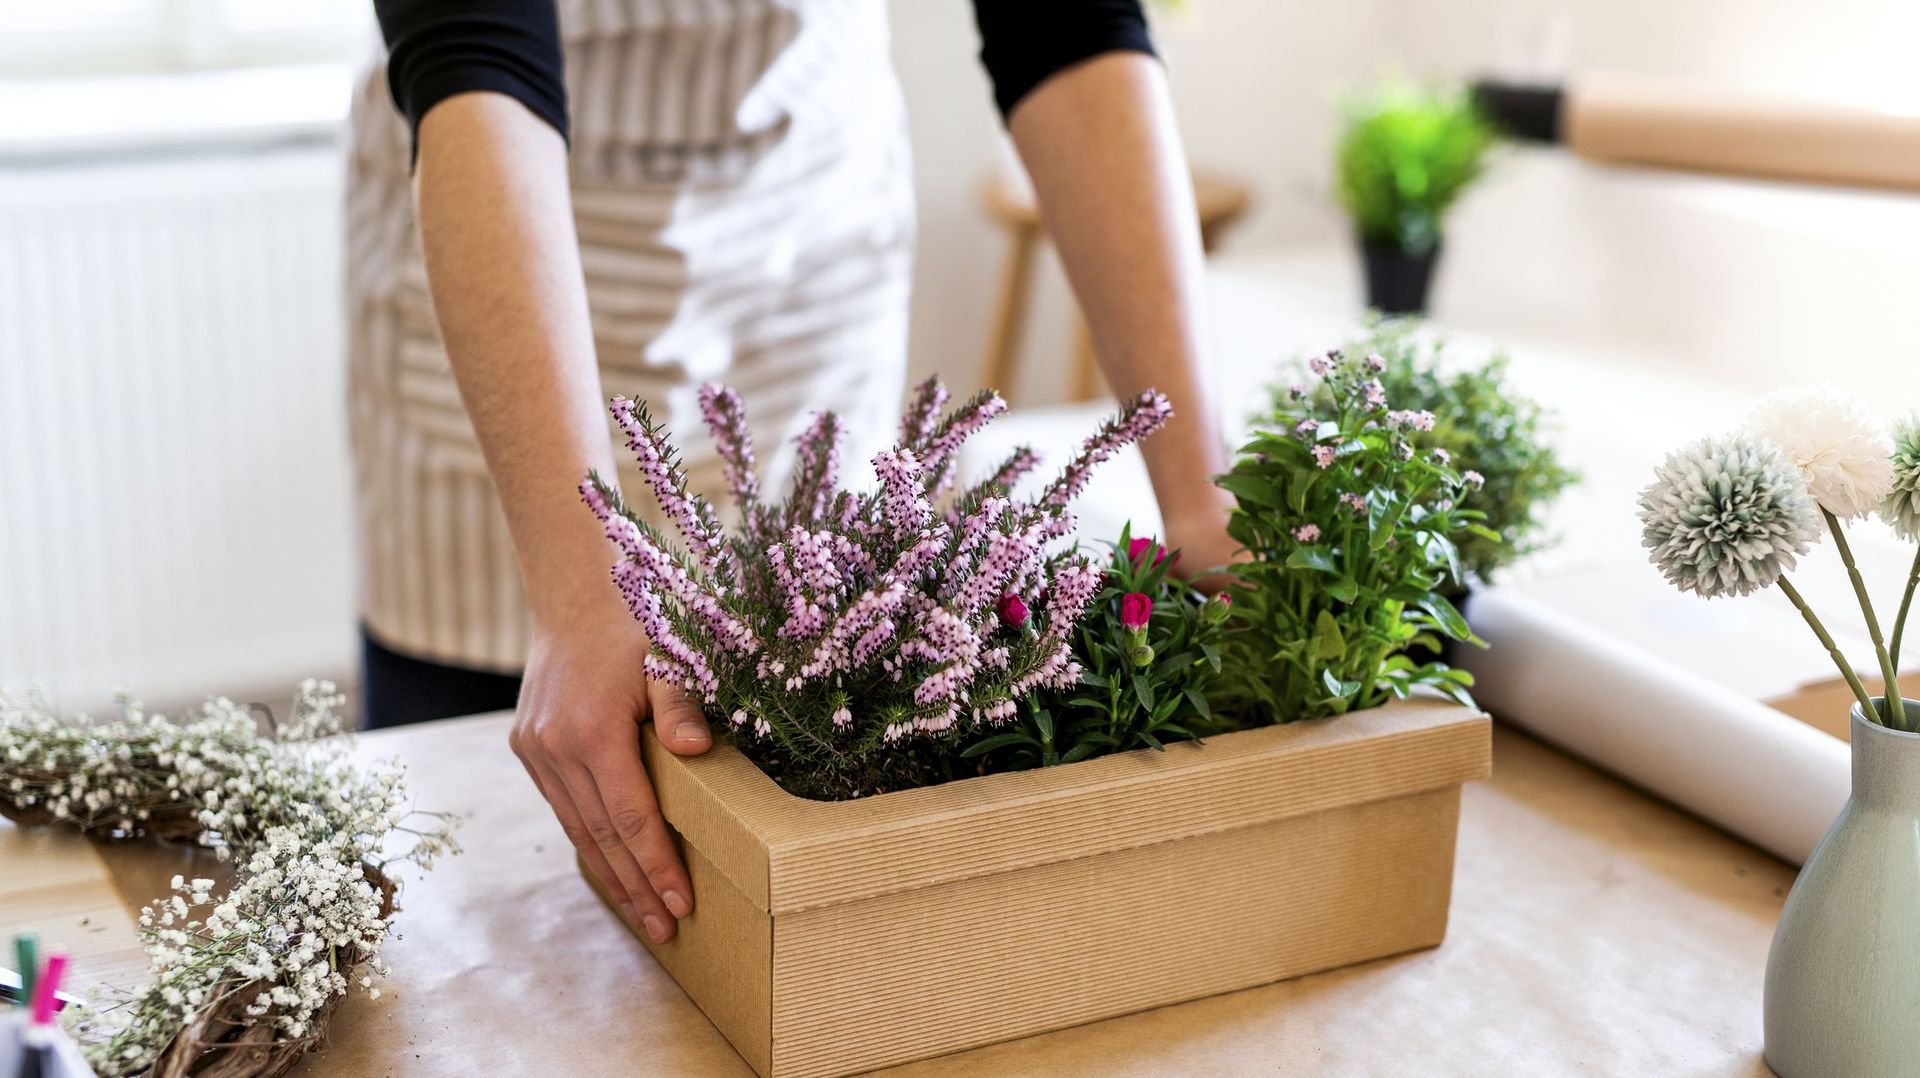 Close-up of woman with flowers inside a cardboard box on table